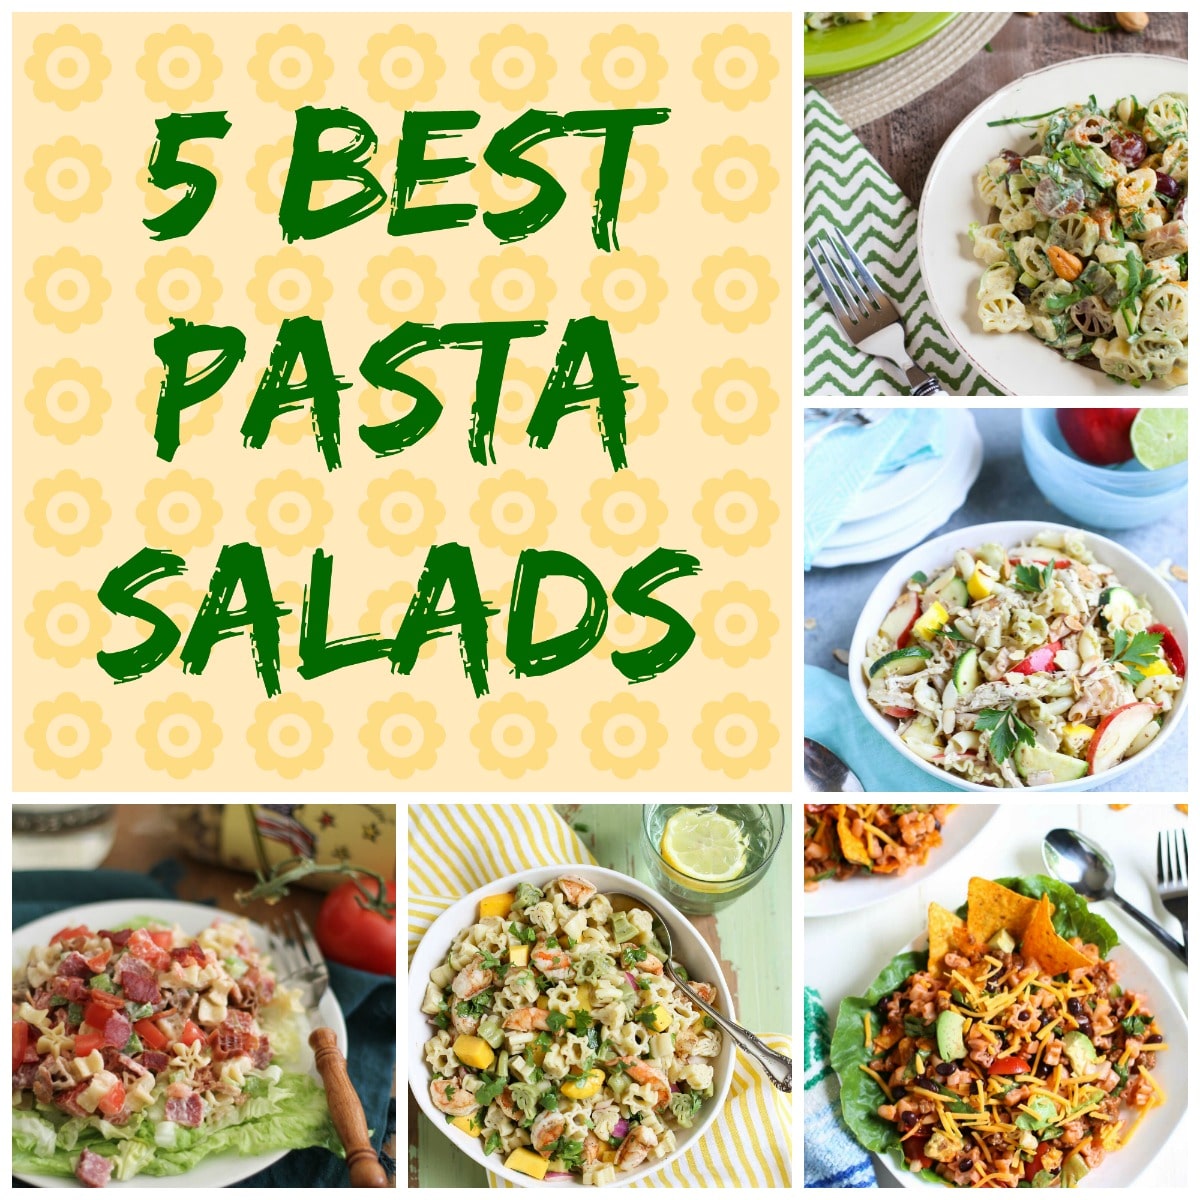 Collage of 5 Best Pasta Salads from World of Pastabilities